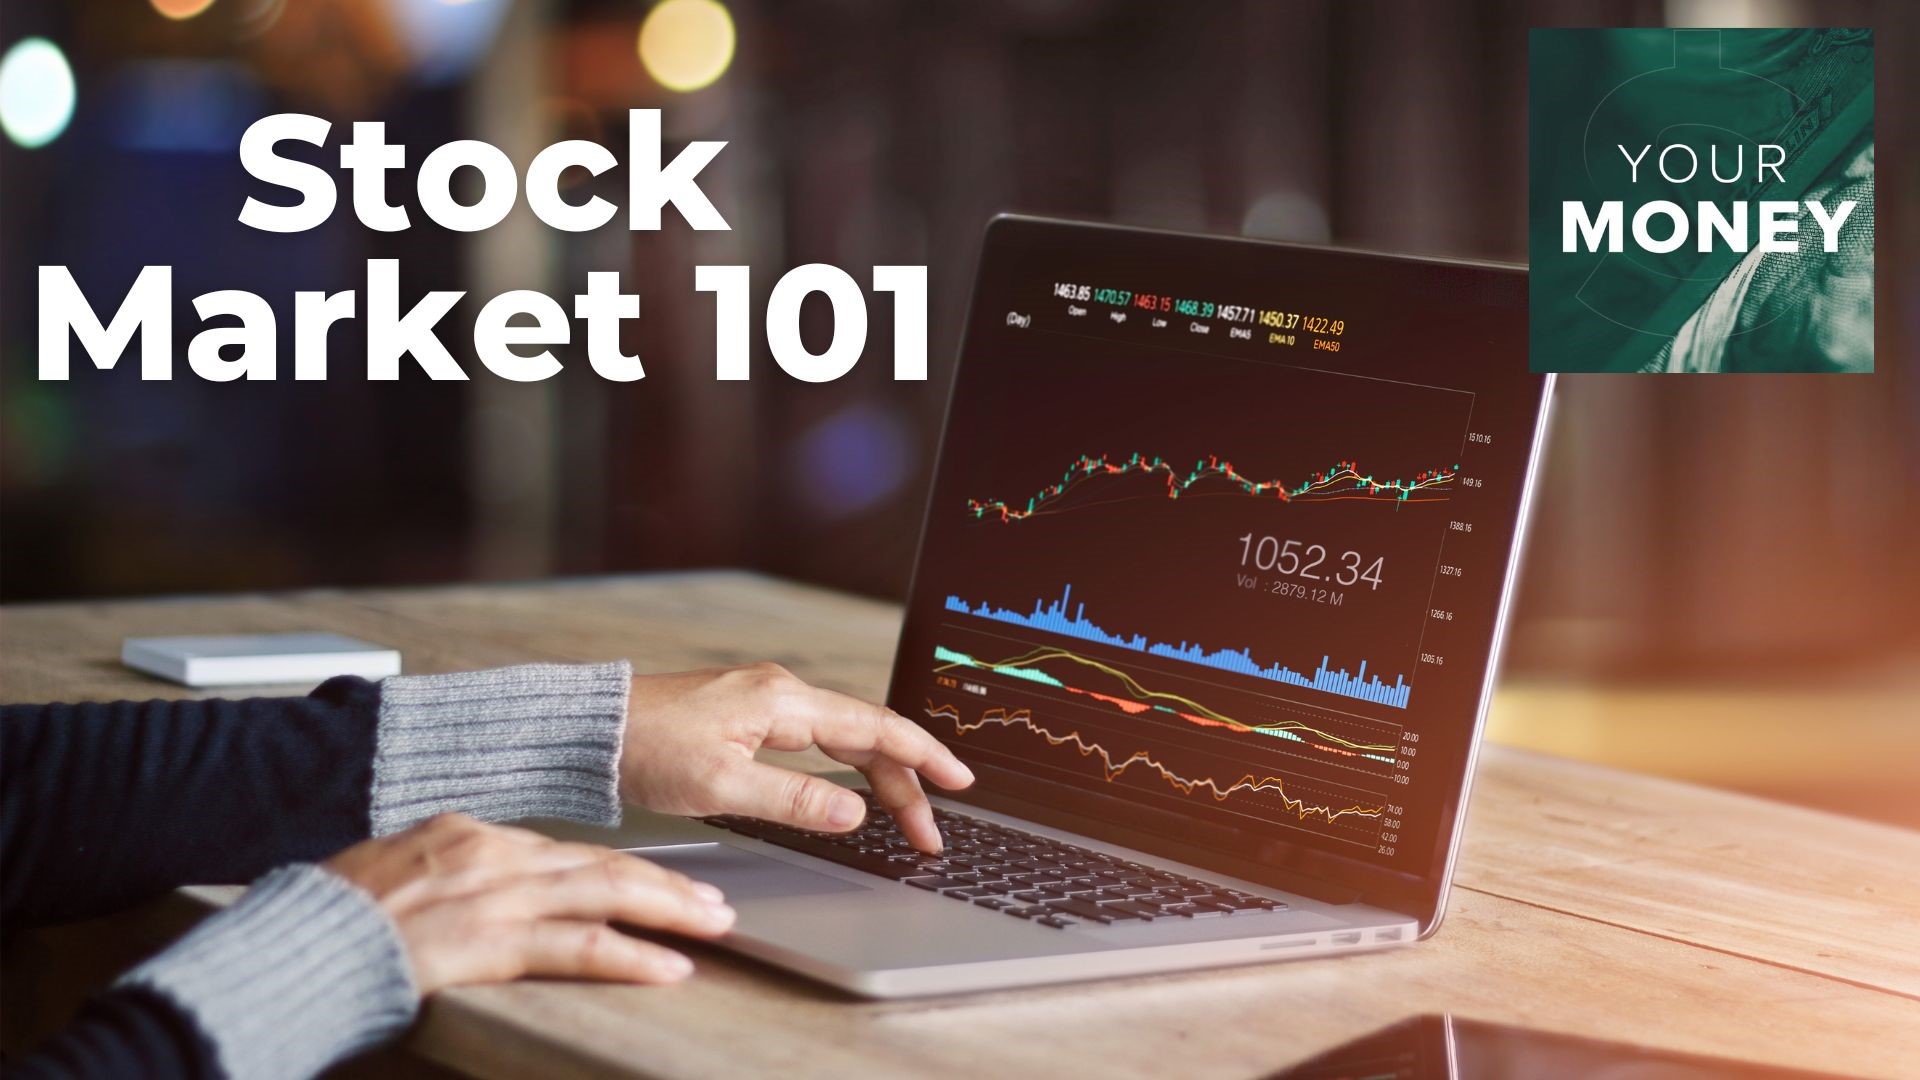 Gordon Severson is helping you understand the stock market. He demystifies the market, explains index investing and shares tools to help you buy and sell.